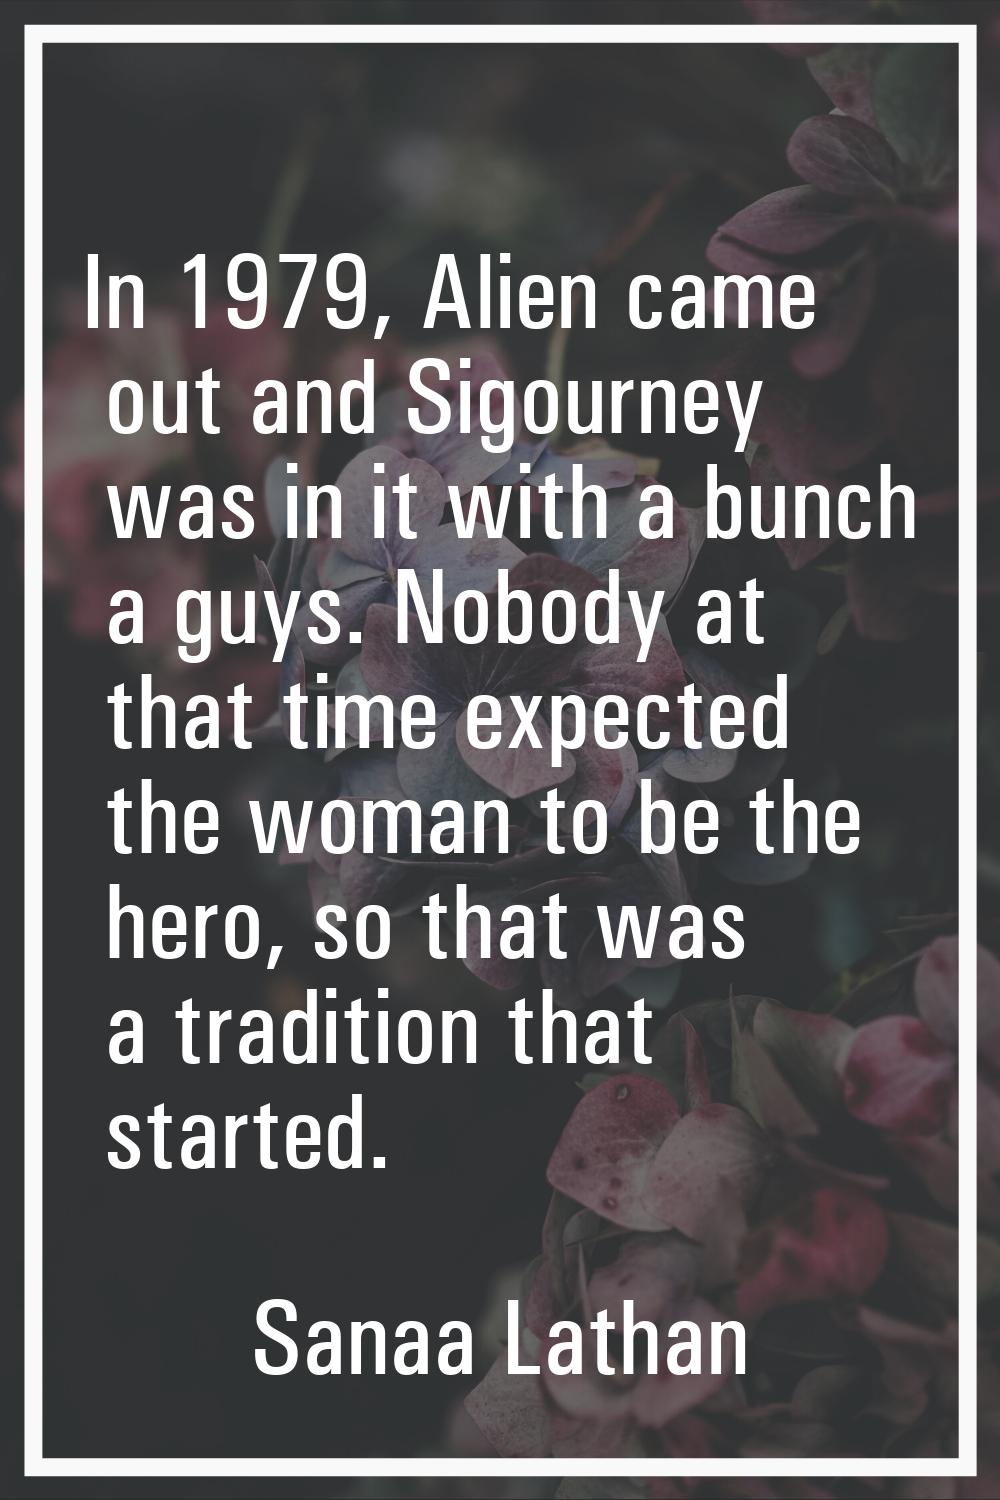 In 1979, Alien came out and Sigourney was in it with a bunch a guys. Nobody at that time expected t